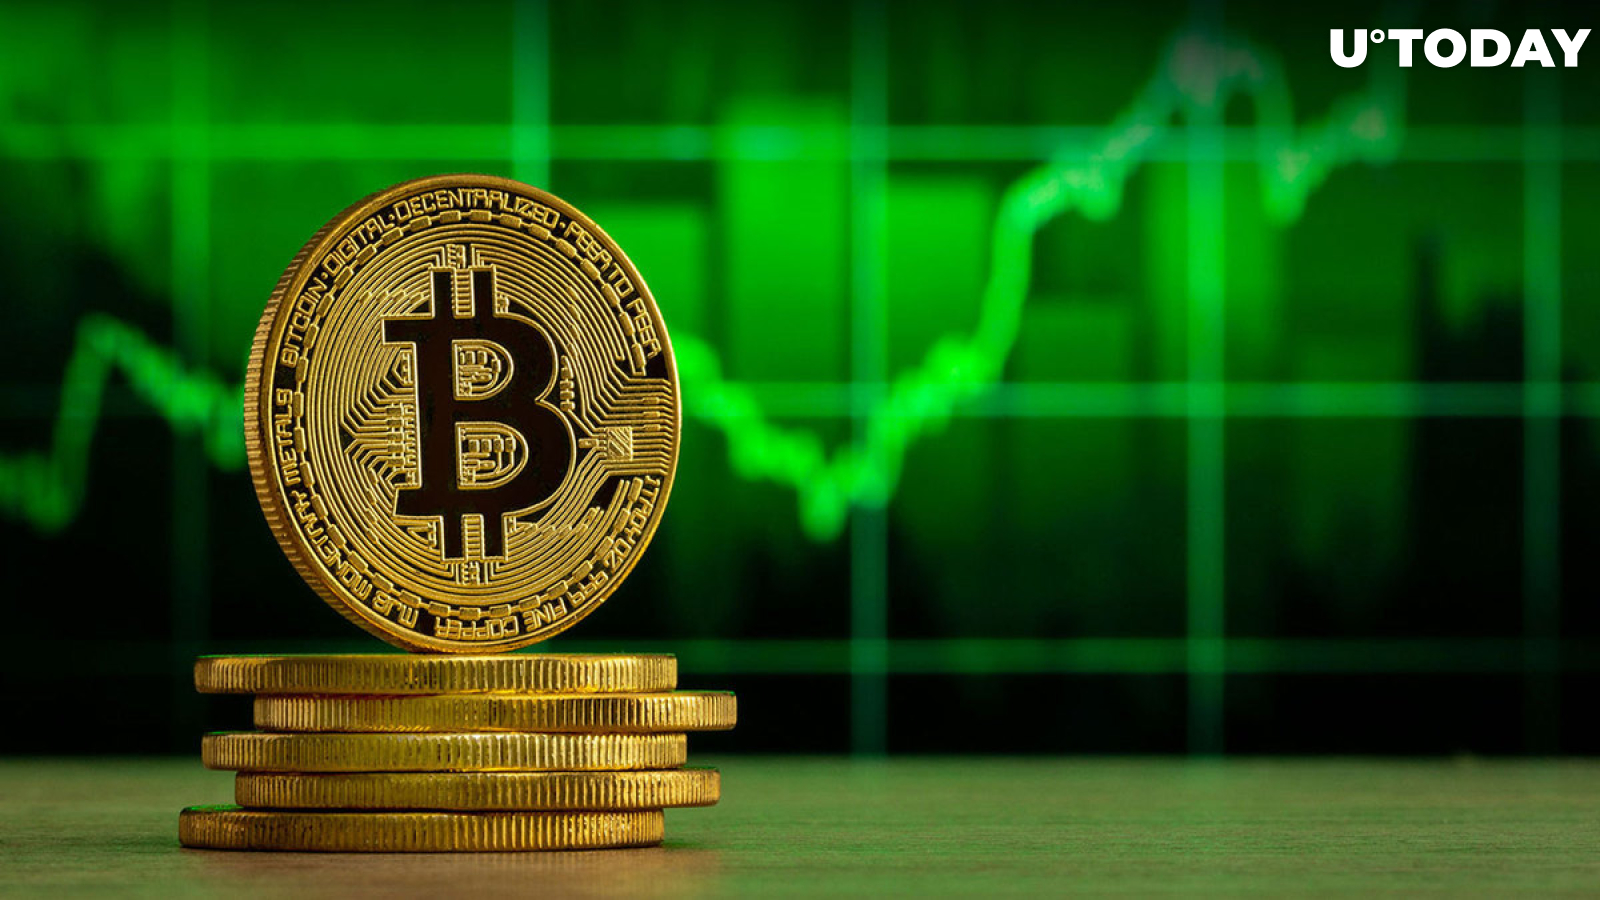 Bitcoin (BTC) May Hit $50,000 by Year’s End and $120,000 By 2025: Standard Chartered